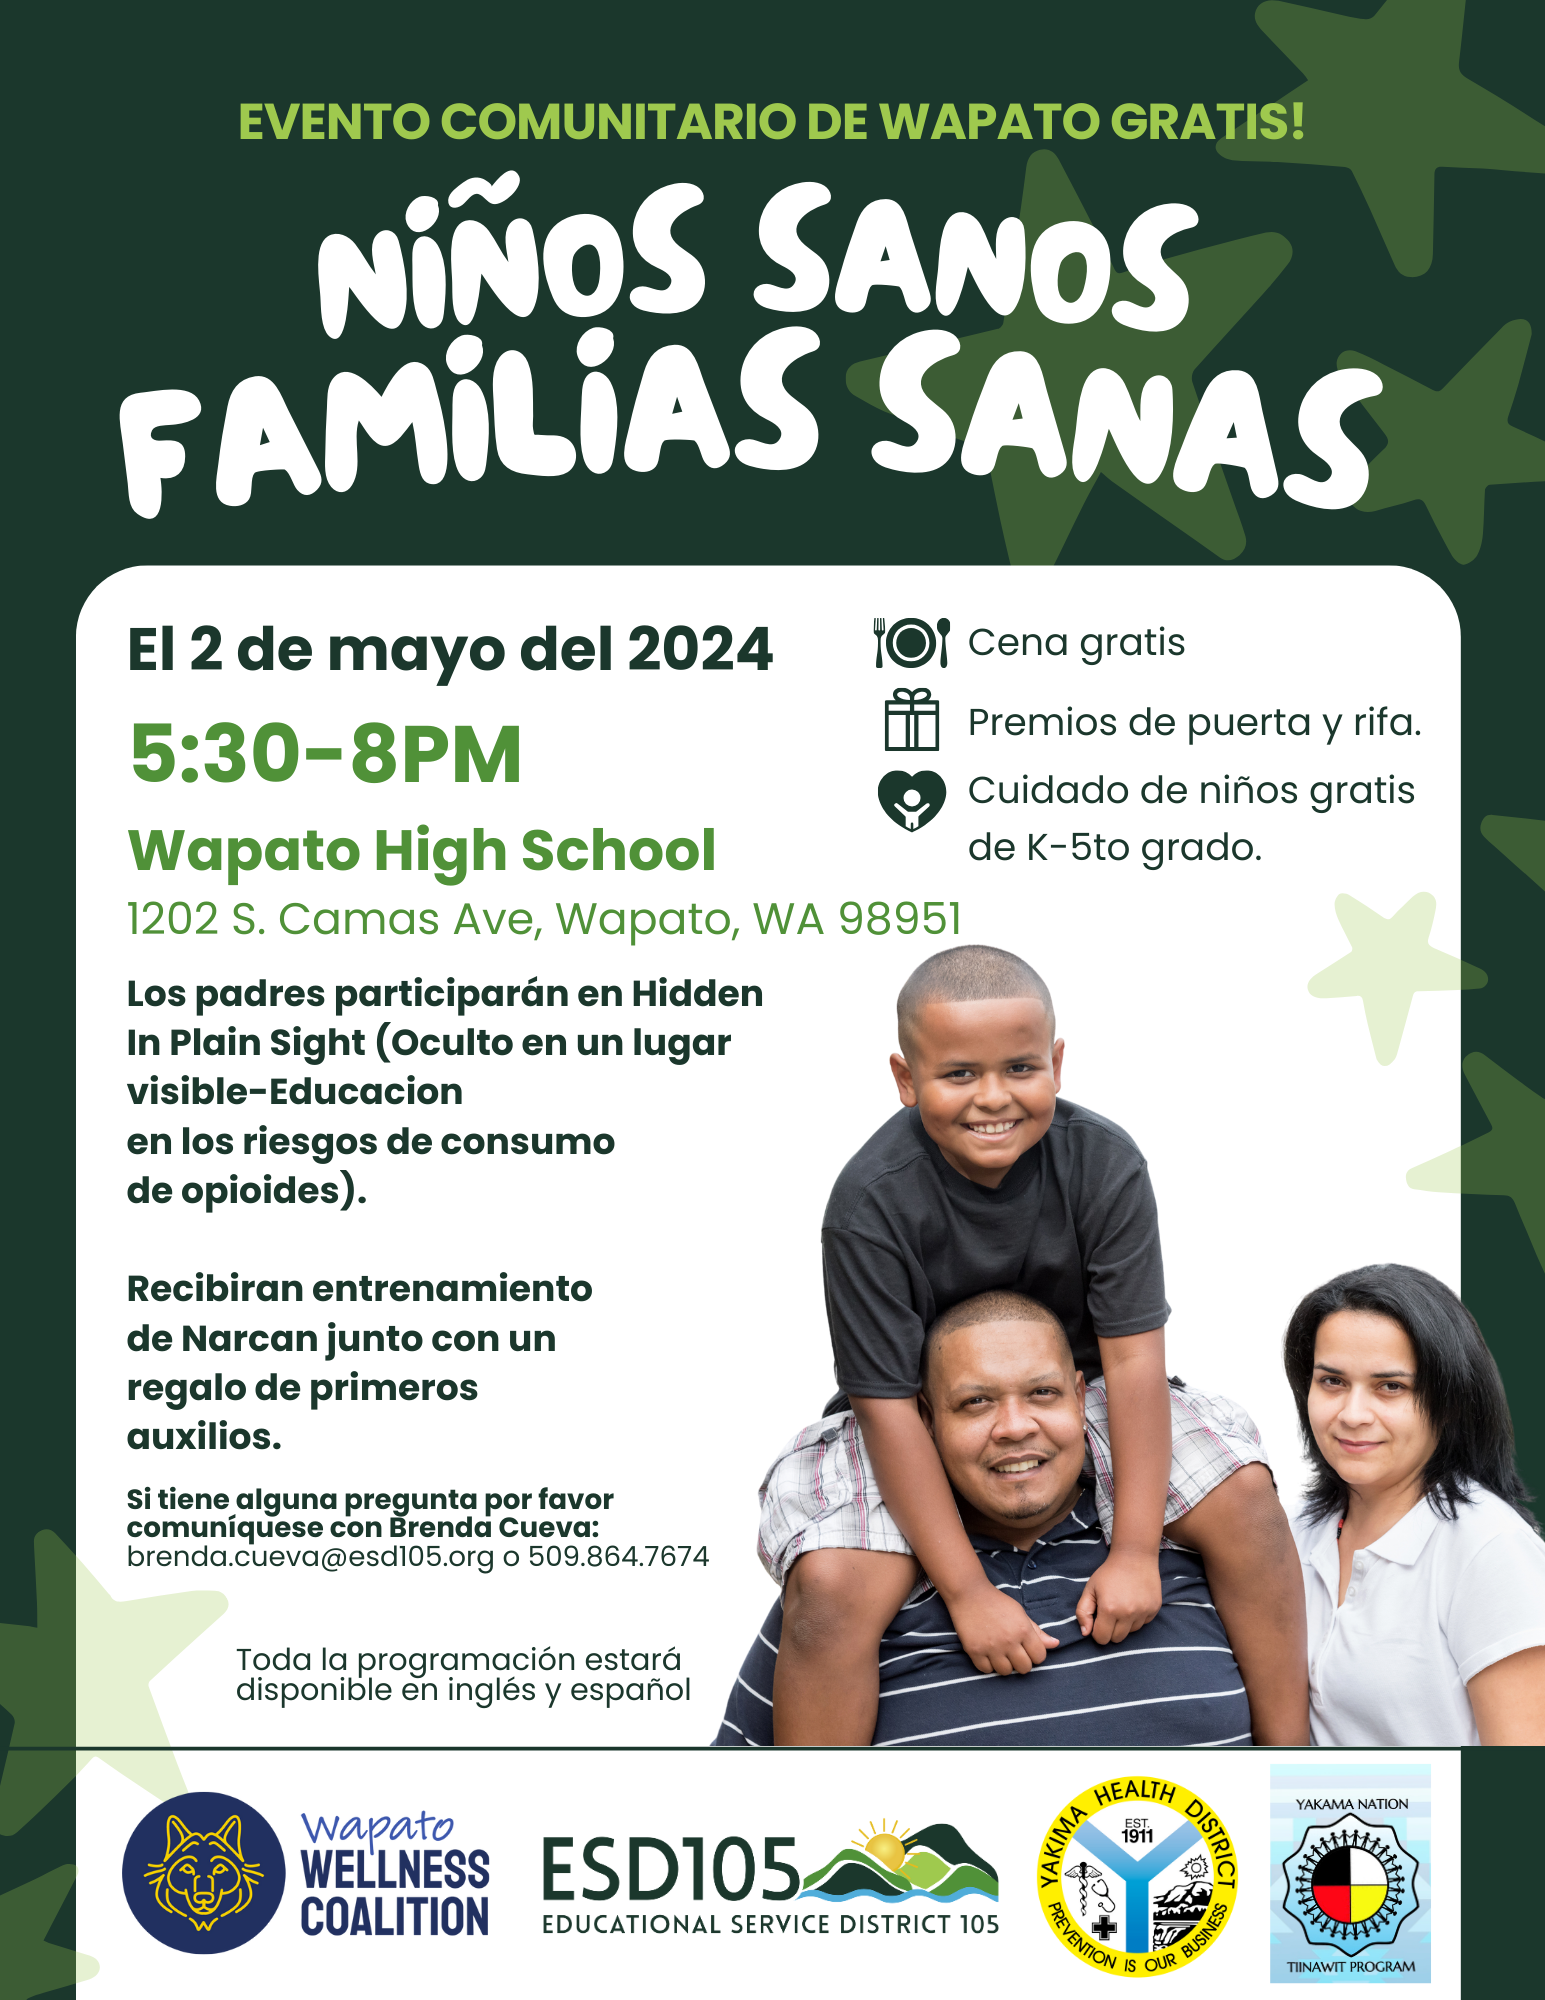 healthy youth, healthy families spanish language flyer